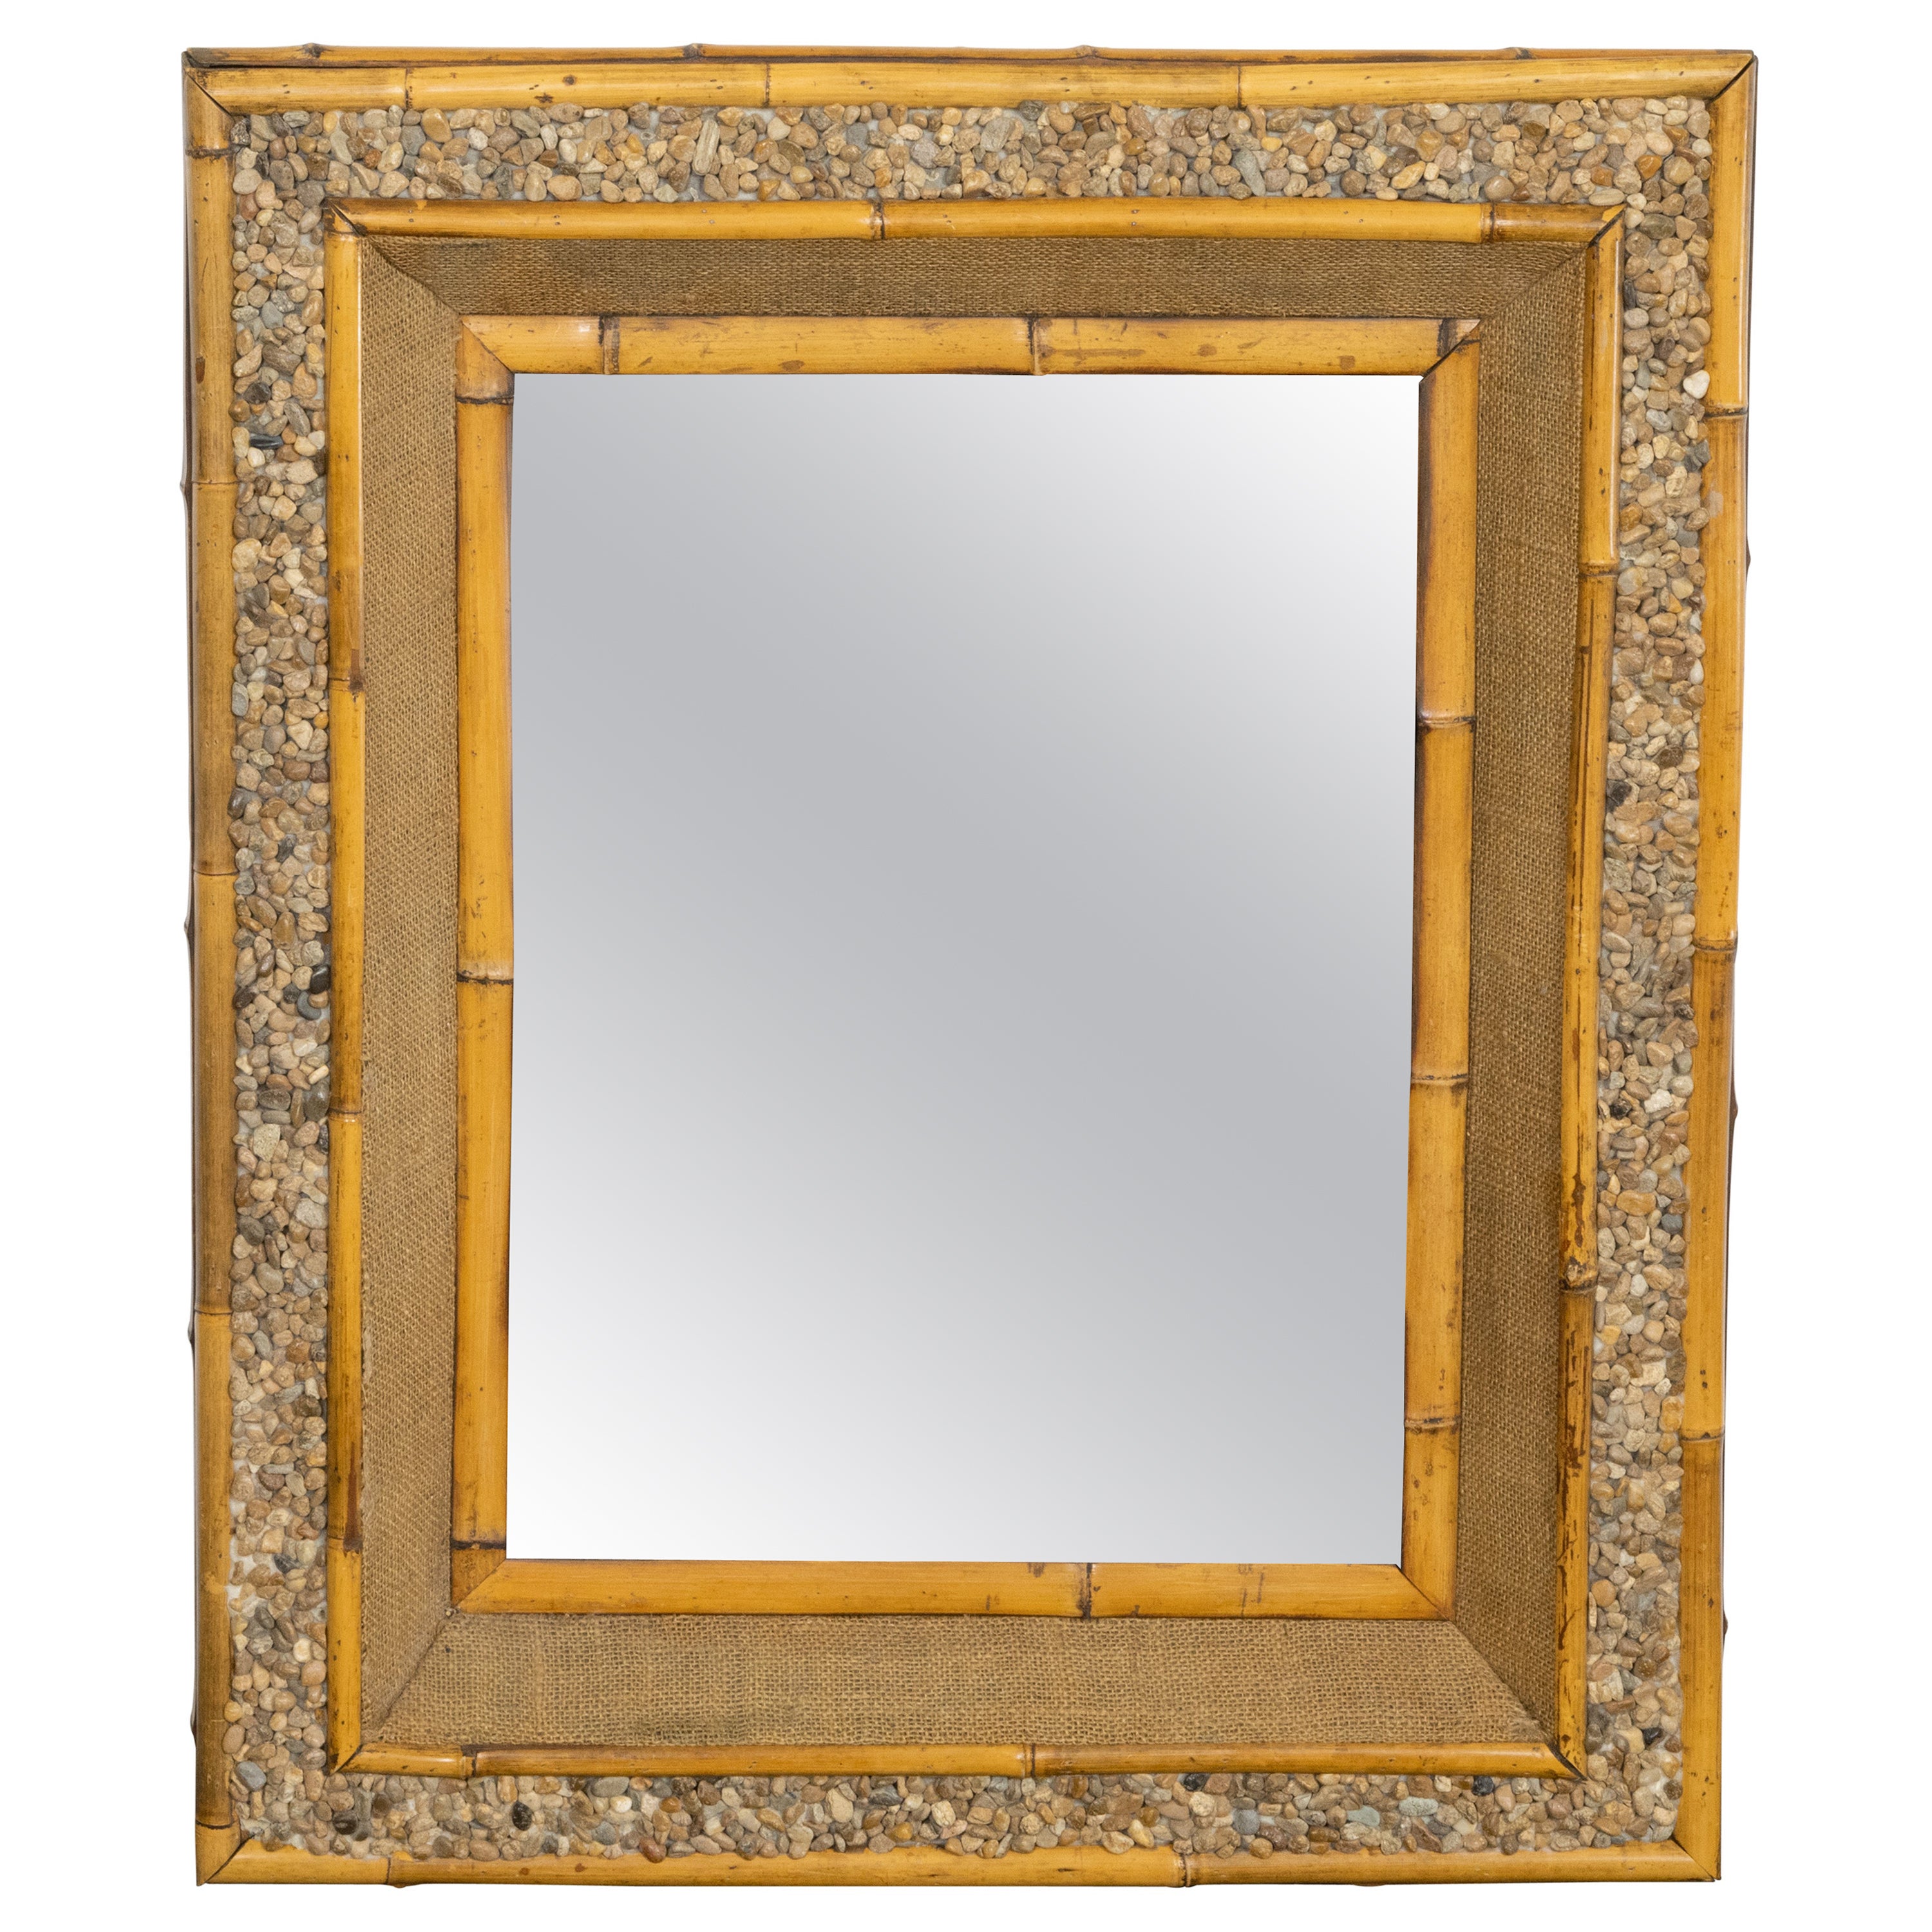 English Bamboo, Rocks and Burlap Rectangular Mirror from the Mid-Century Period For Sale